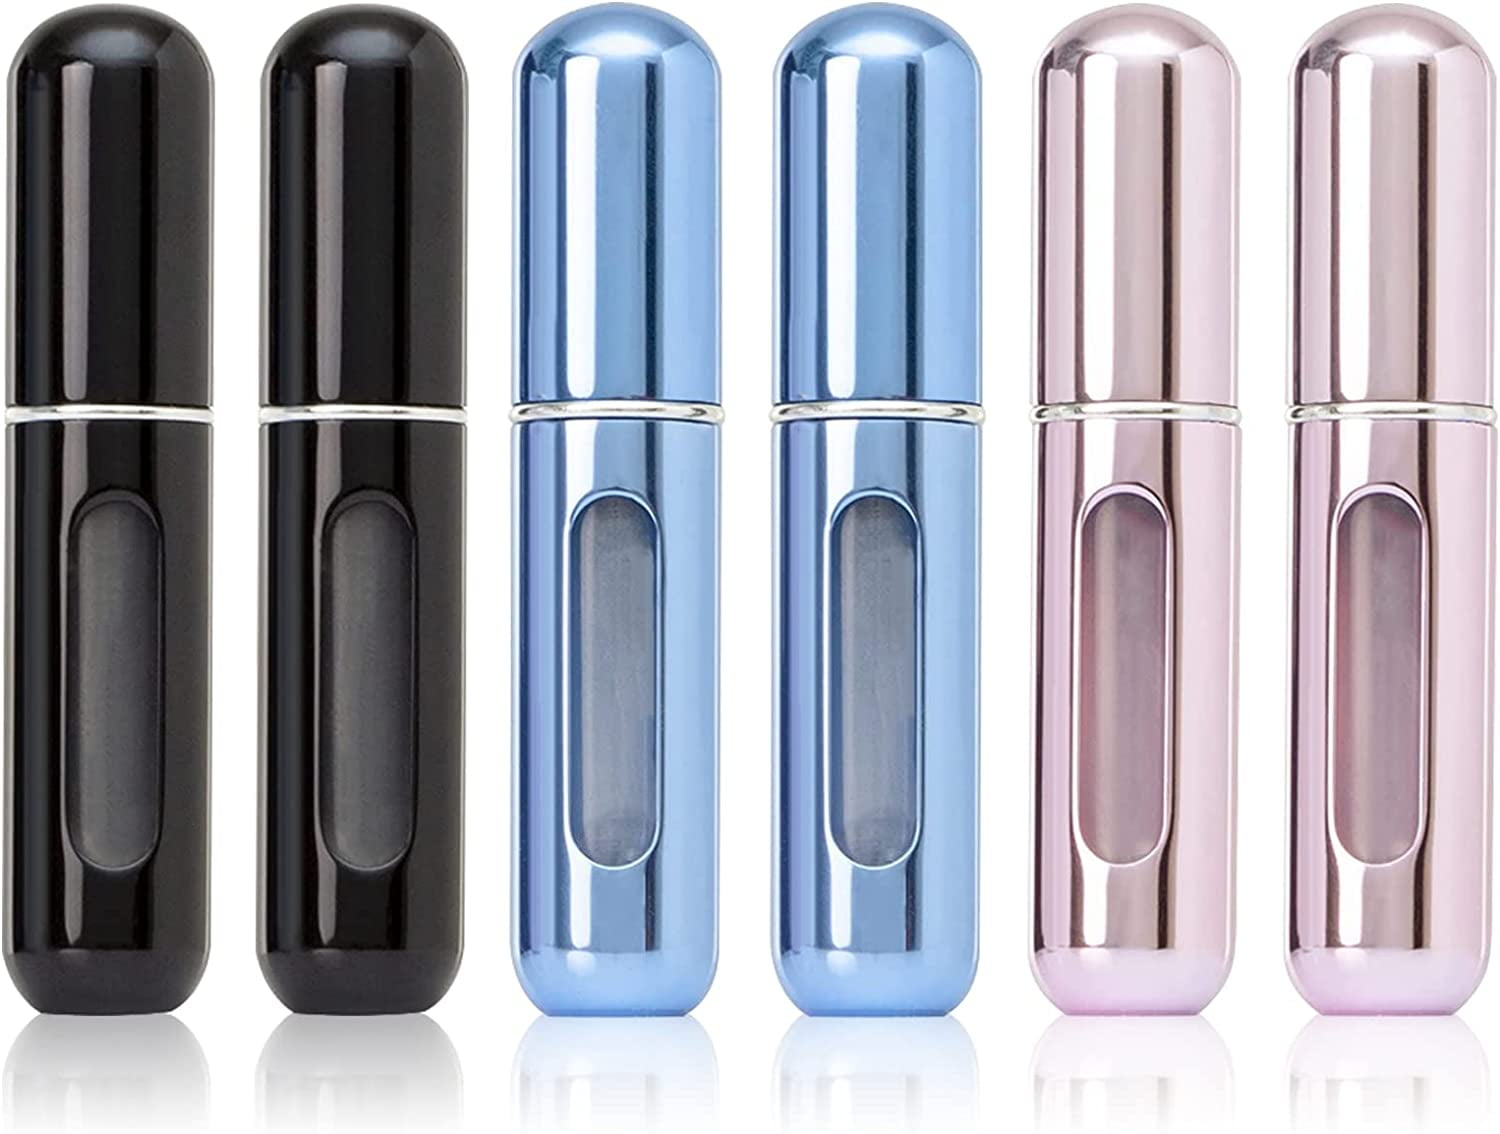 NOGIS 6Pcs Perfume Travel Refillable Bottle, Portable Refillable Perfume  Atomizer, 5ml Travel Size Perfume Sprayer for Gift, Dating,Traveling  Outgoing,Mini Perfume Atomizer (Black, Blue, Pink) 